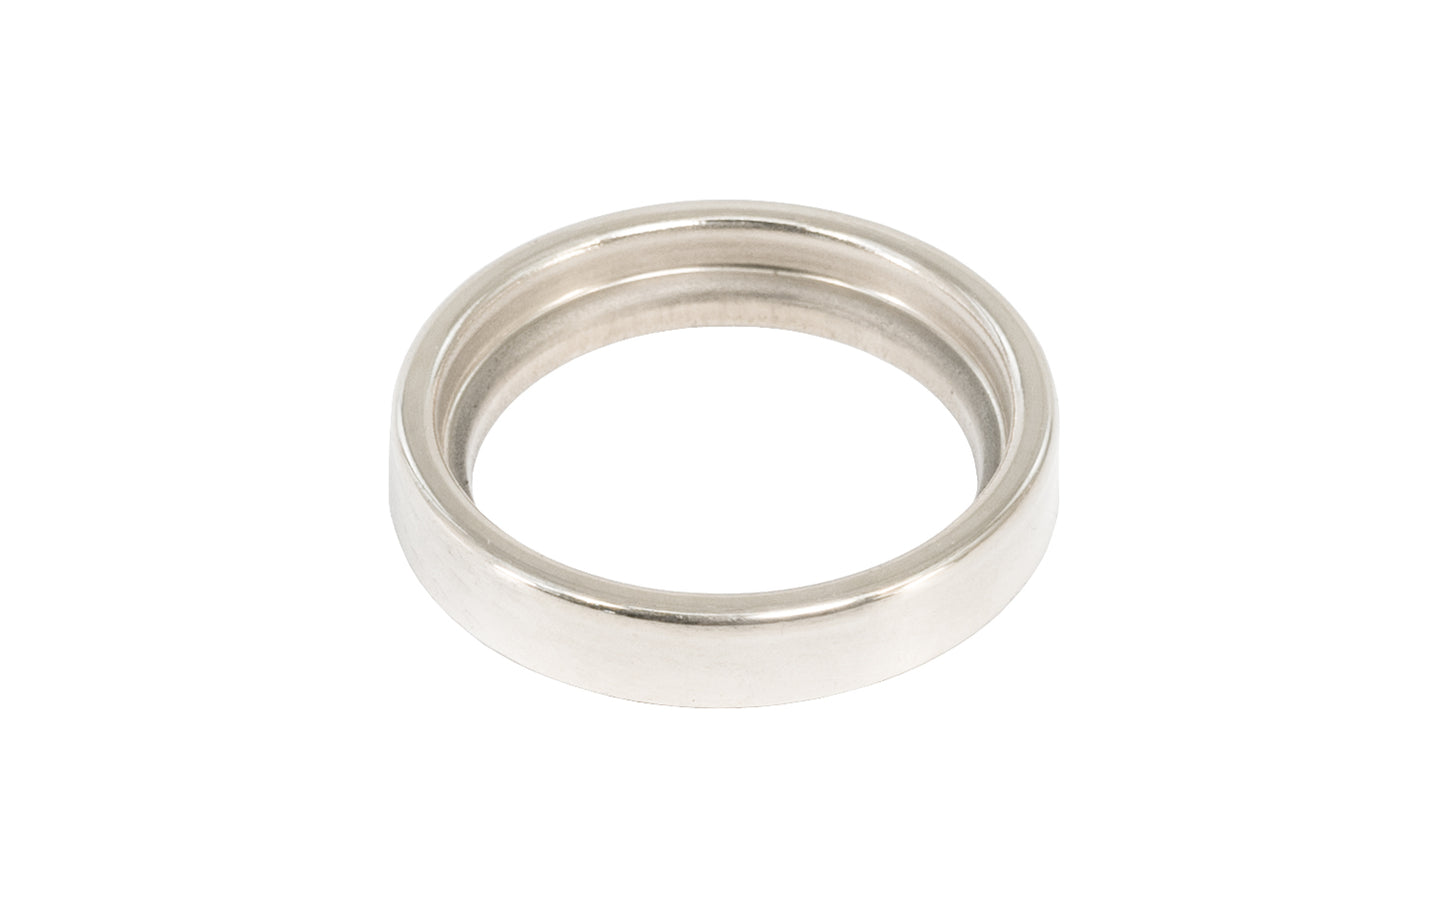 Vintage-style Hardware · A classic & traditional stamped brass round collar ring for keyway cylinder. 1-3/8" top inside diameter & 1-1/4" bottom inside diameter. Polished nickel finish.